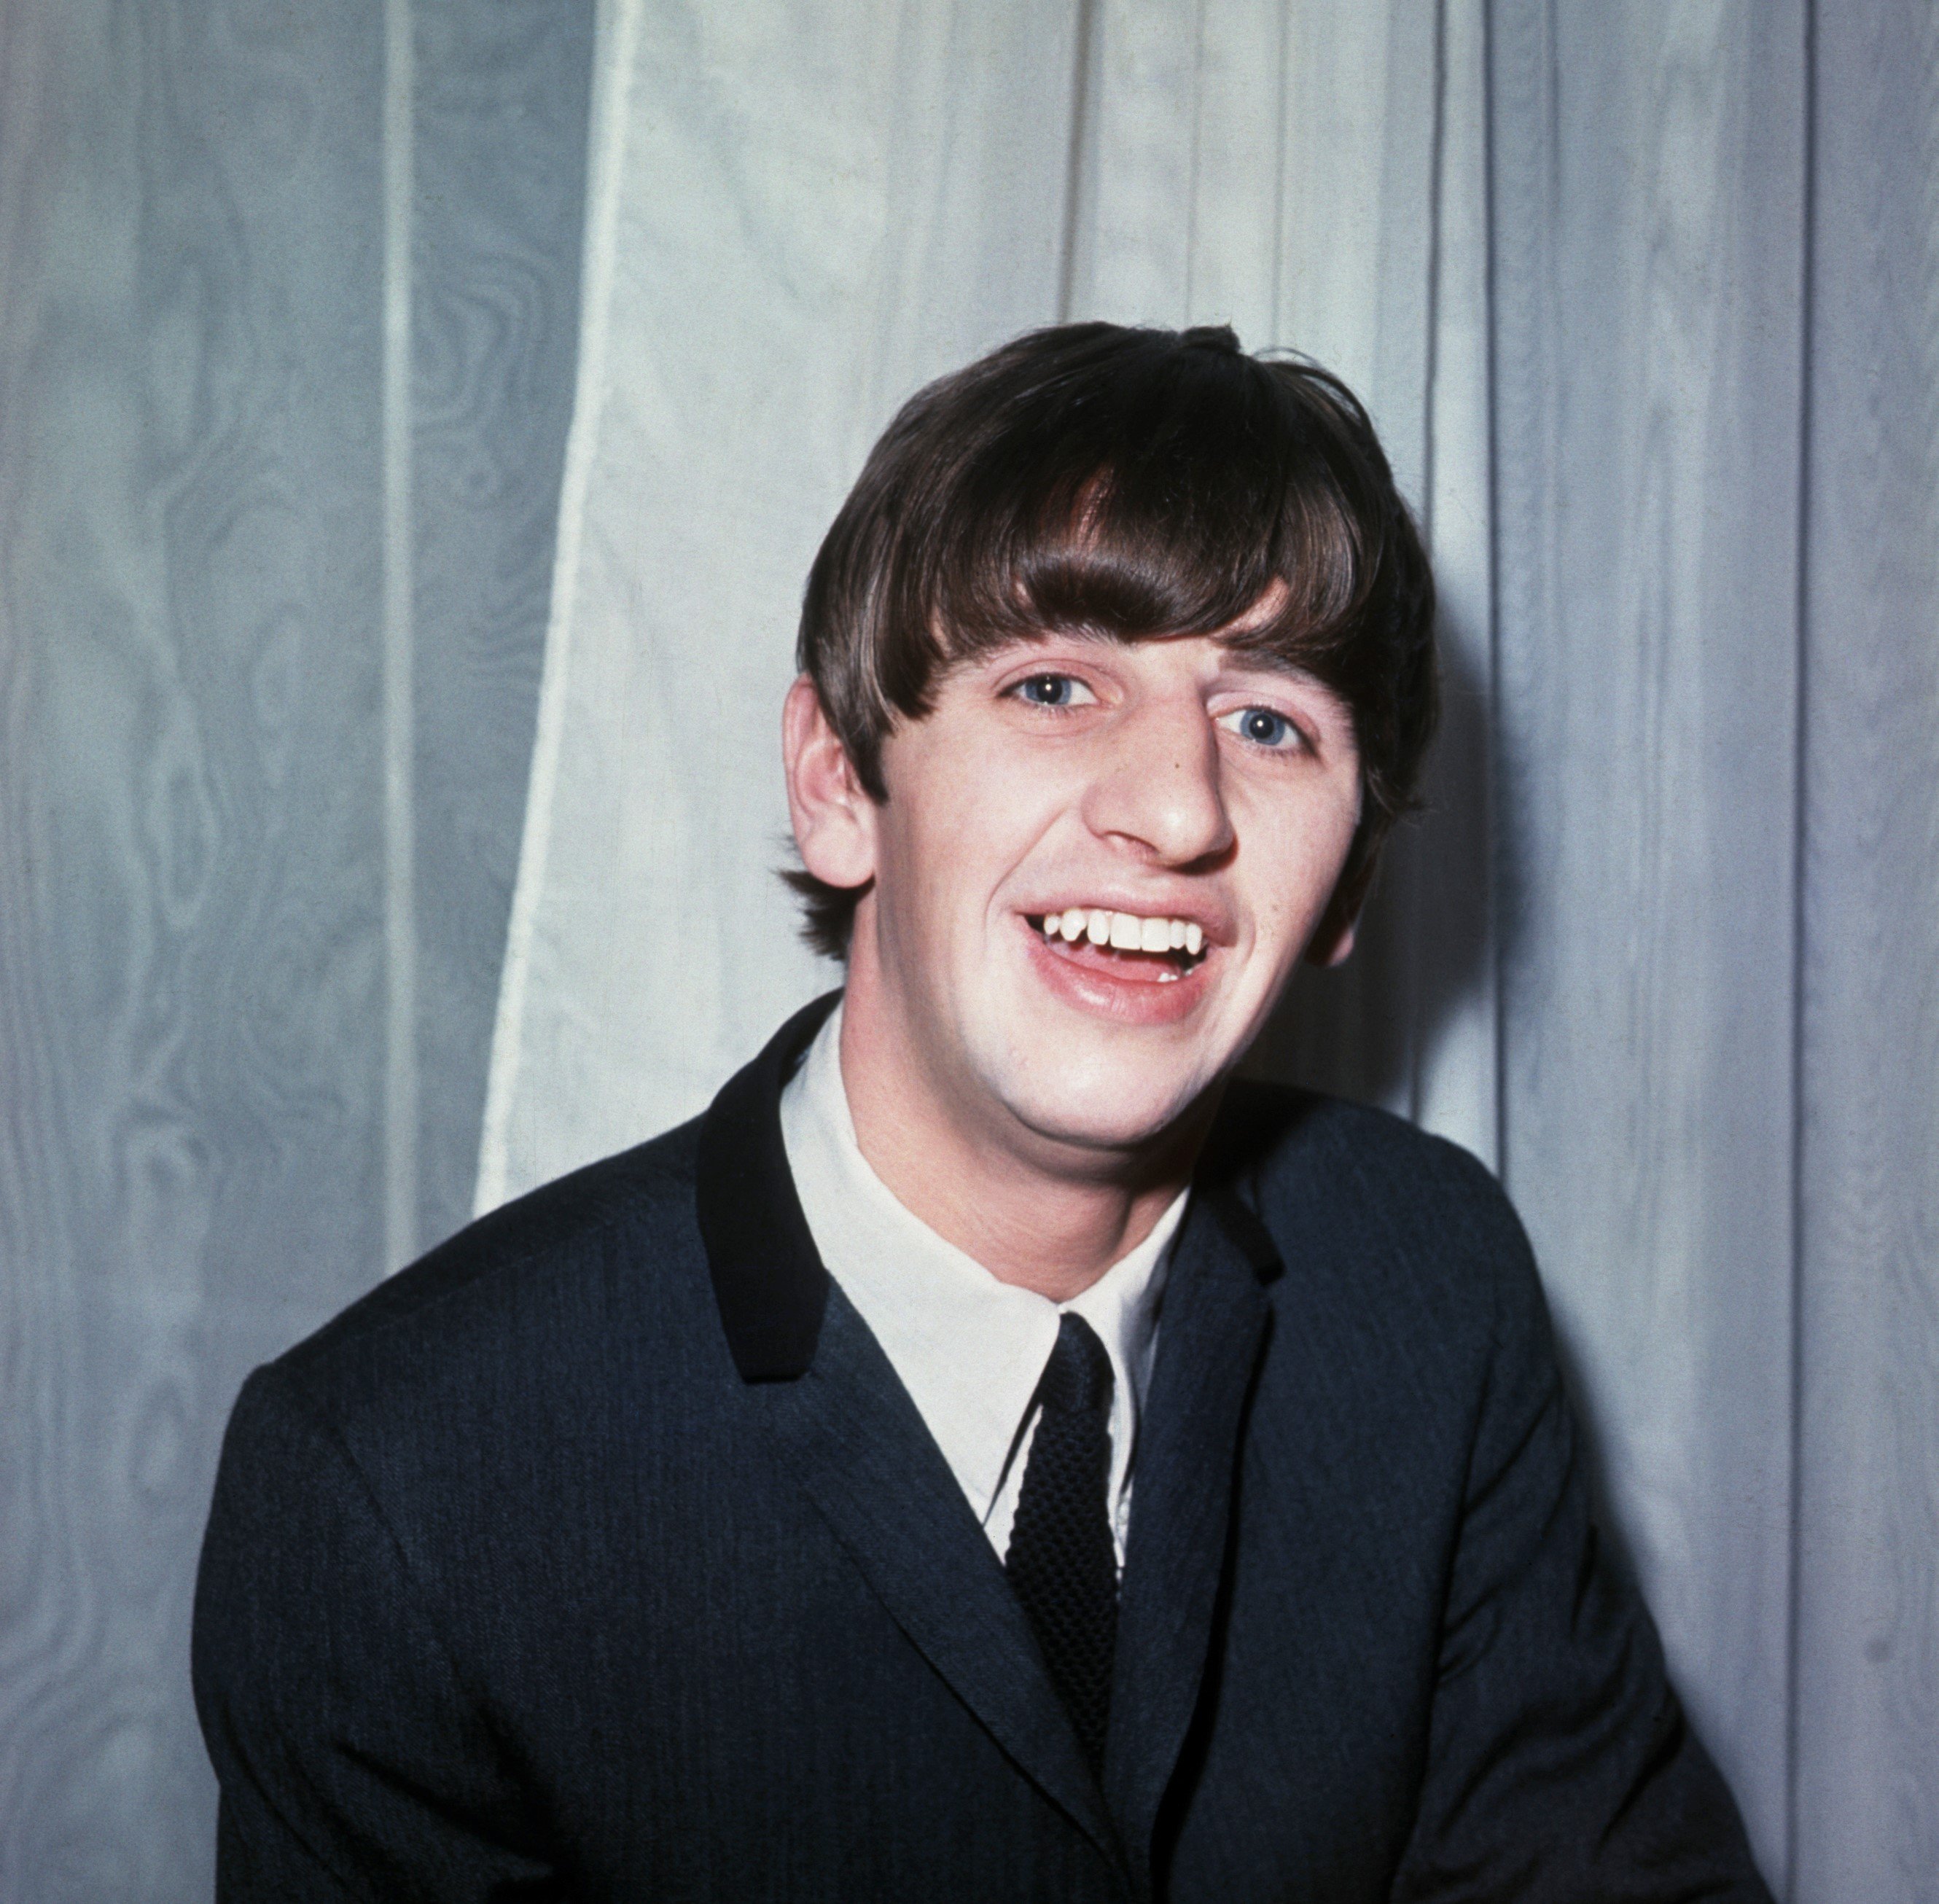 A Fan Stole Ringo Starr’s Hair From His Head: ‘I Just Started Screaming’